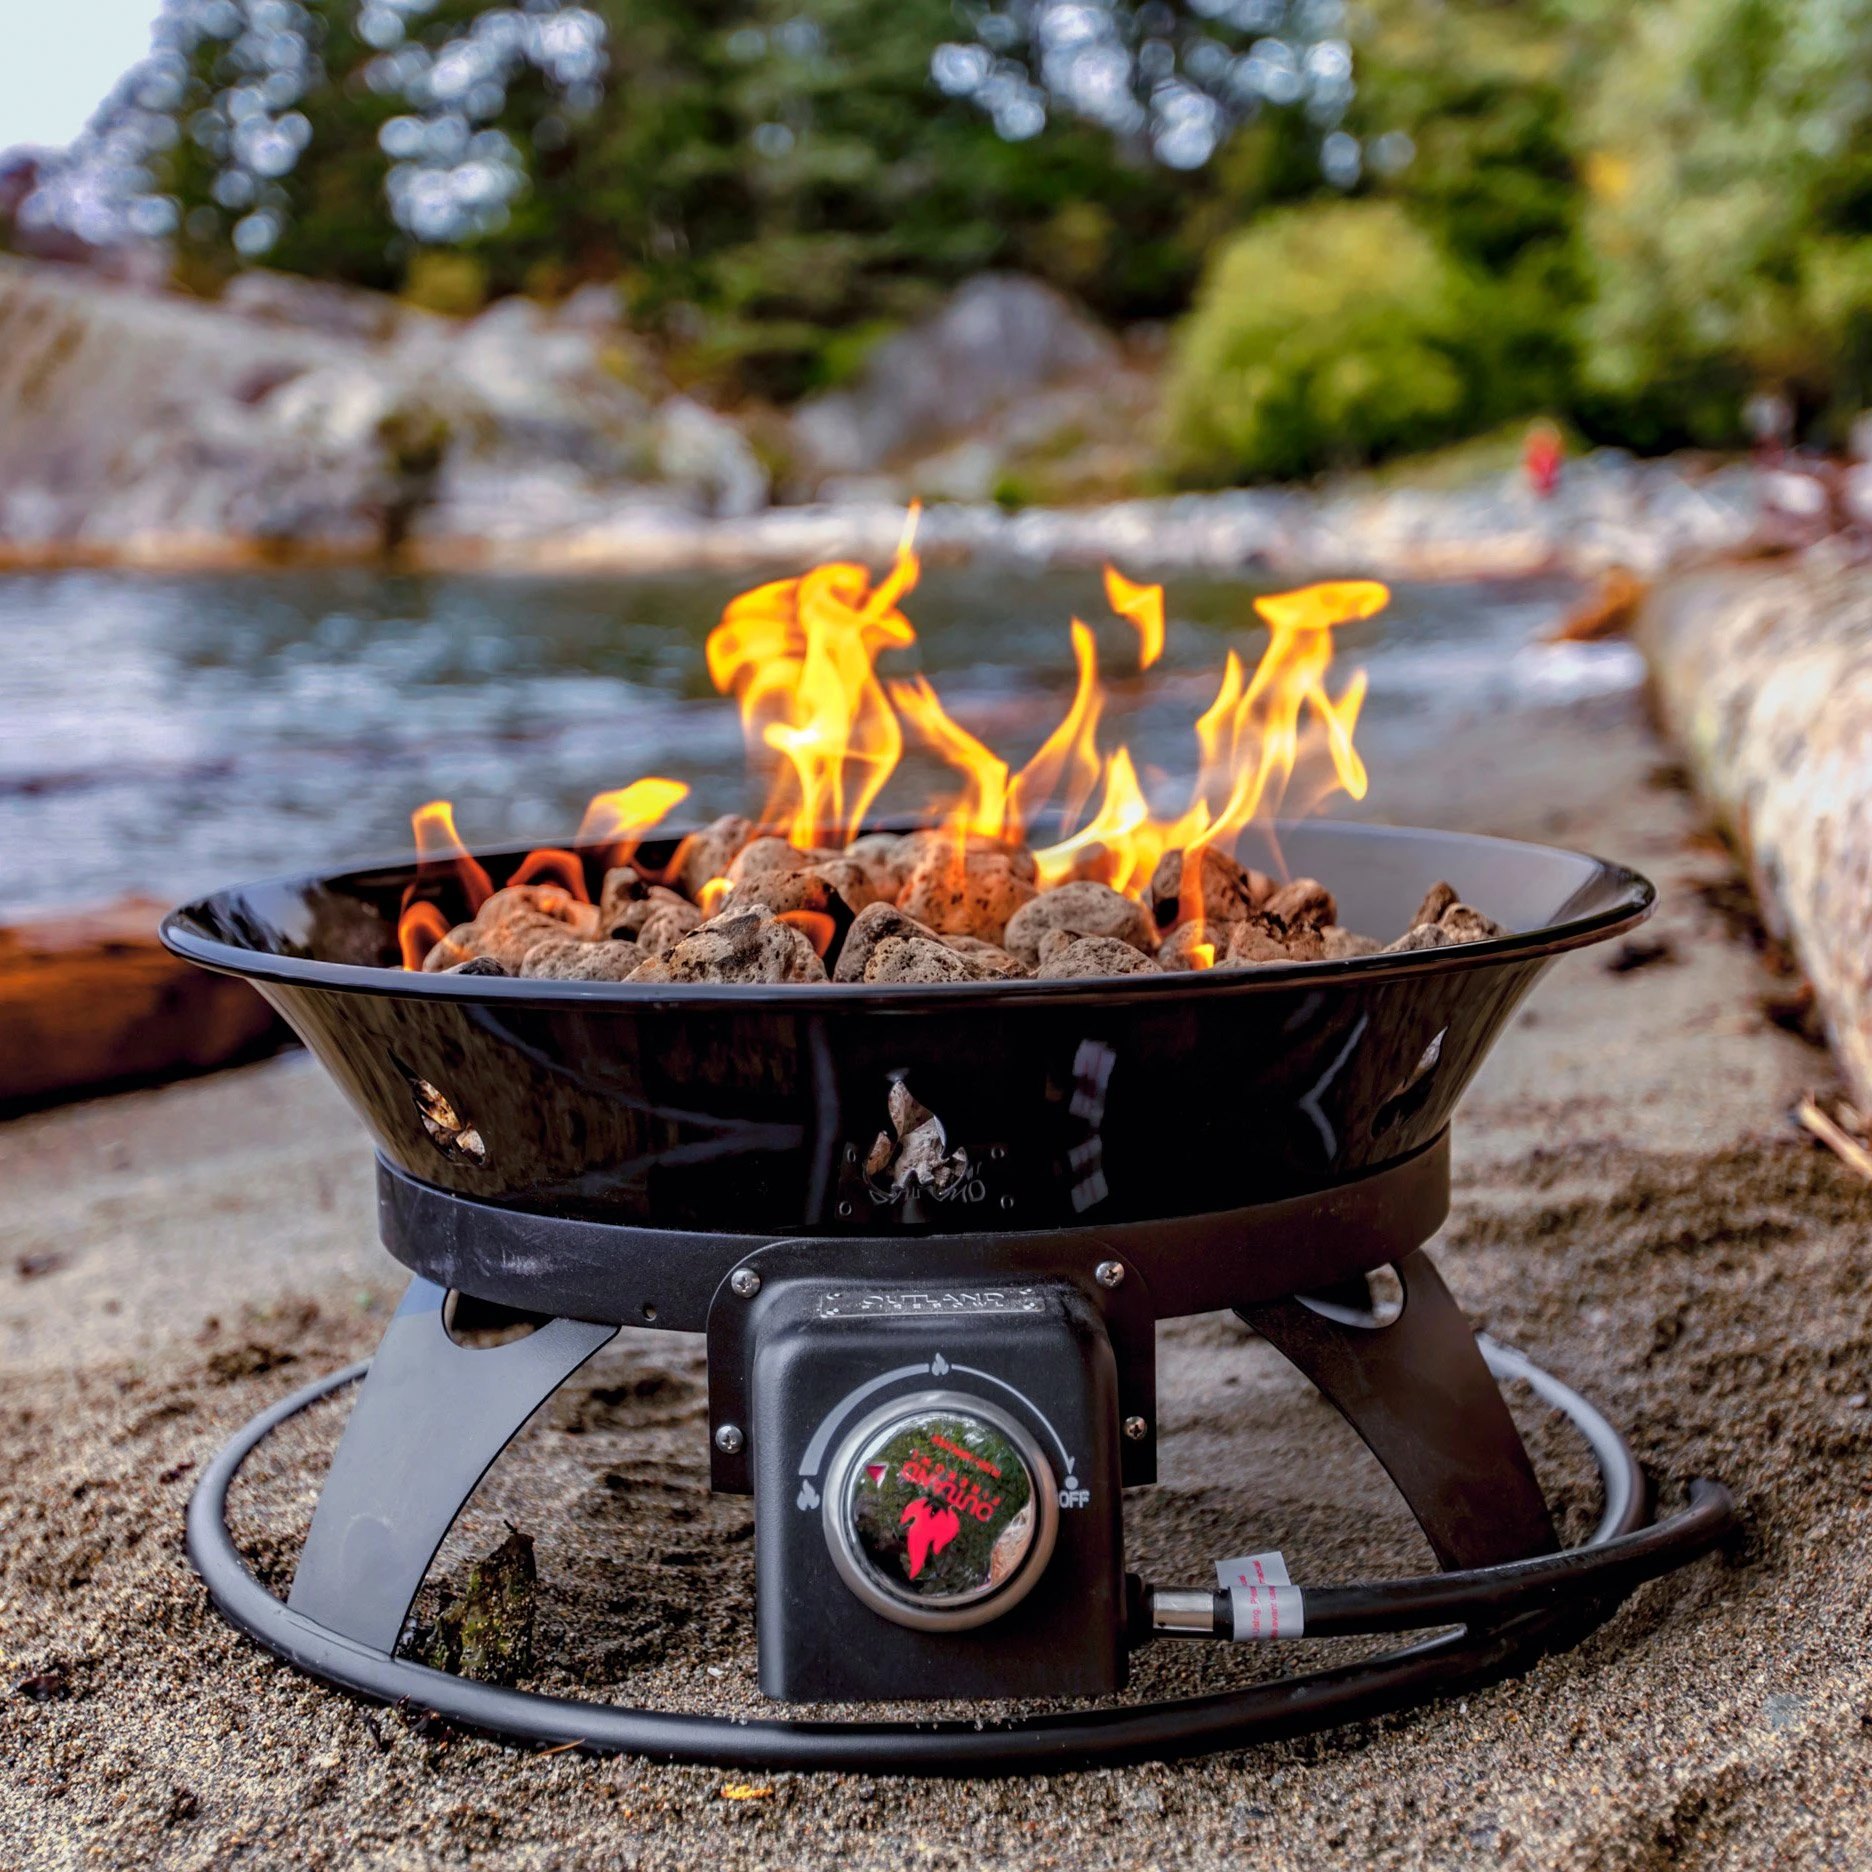 10 BEST Portable Propane Fire Pits For Camping And Home